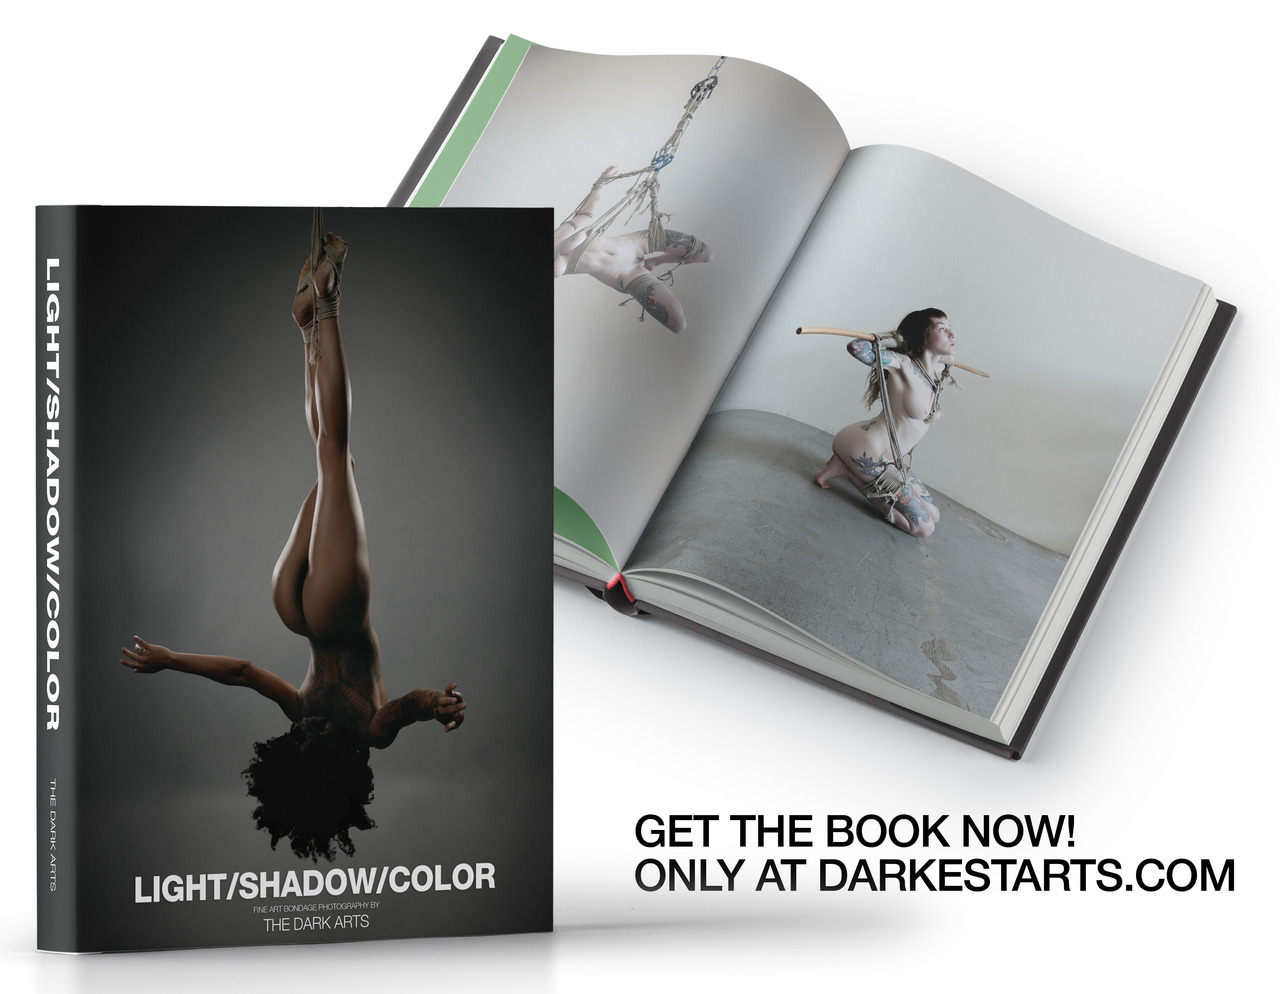 finchdown: LIGHT/SHADOW/COLOR is a 340 page hardcover fine art bondage coffee table